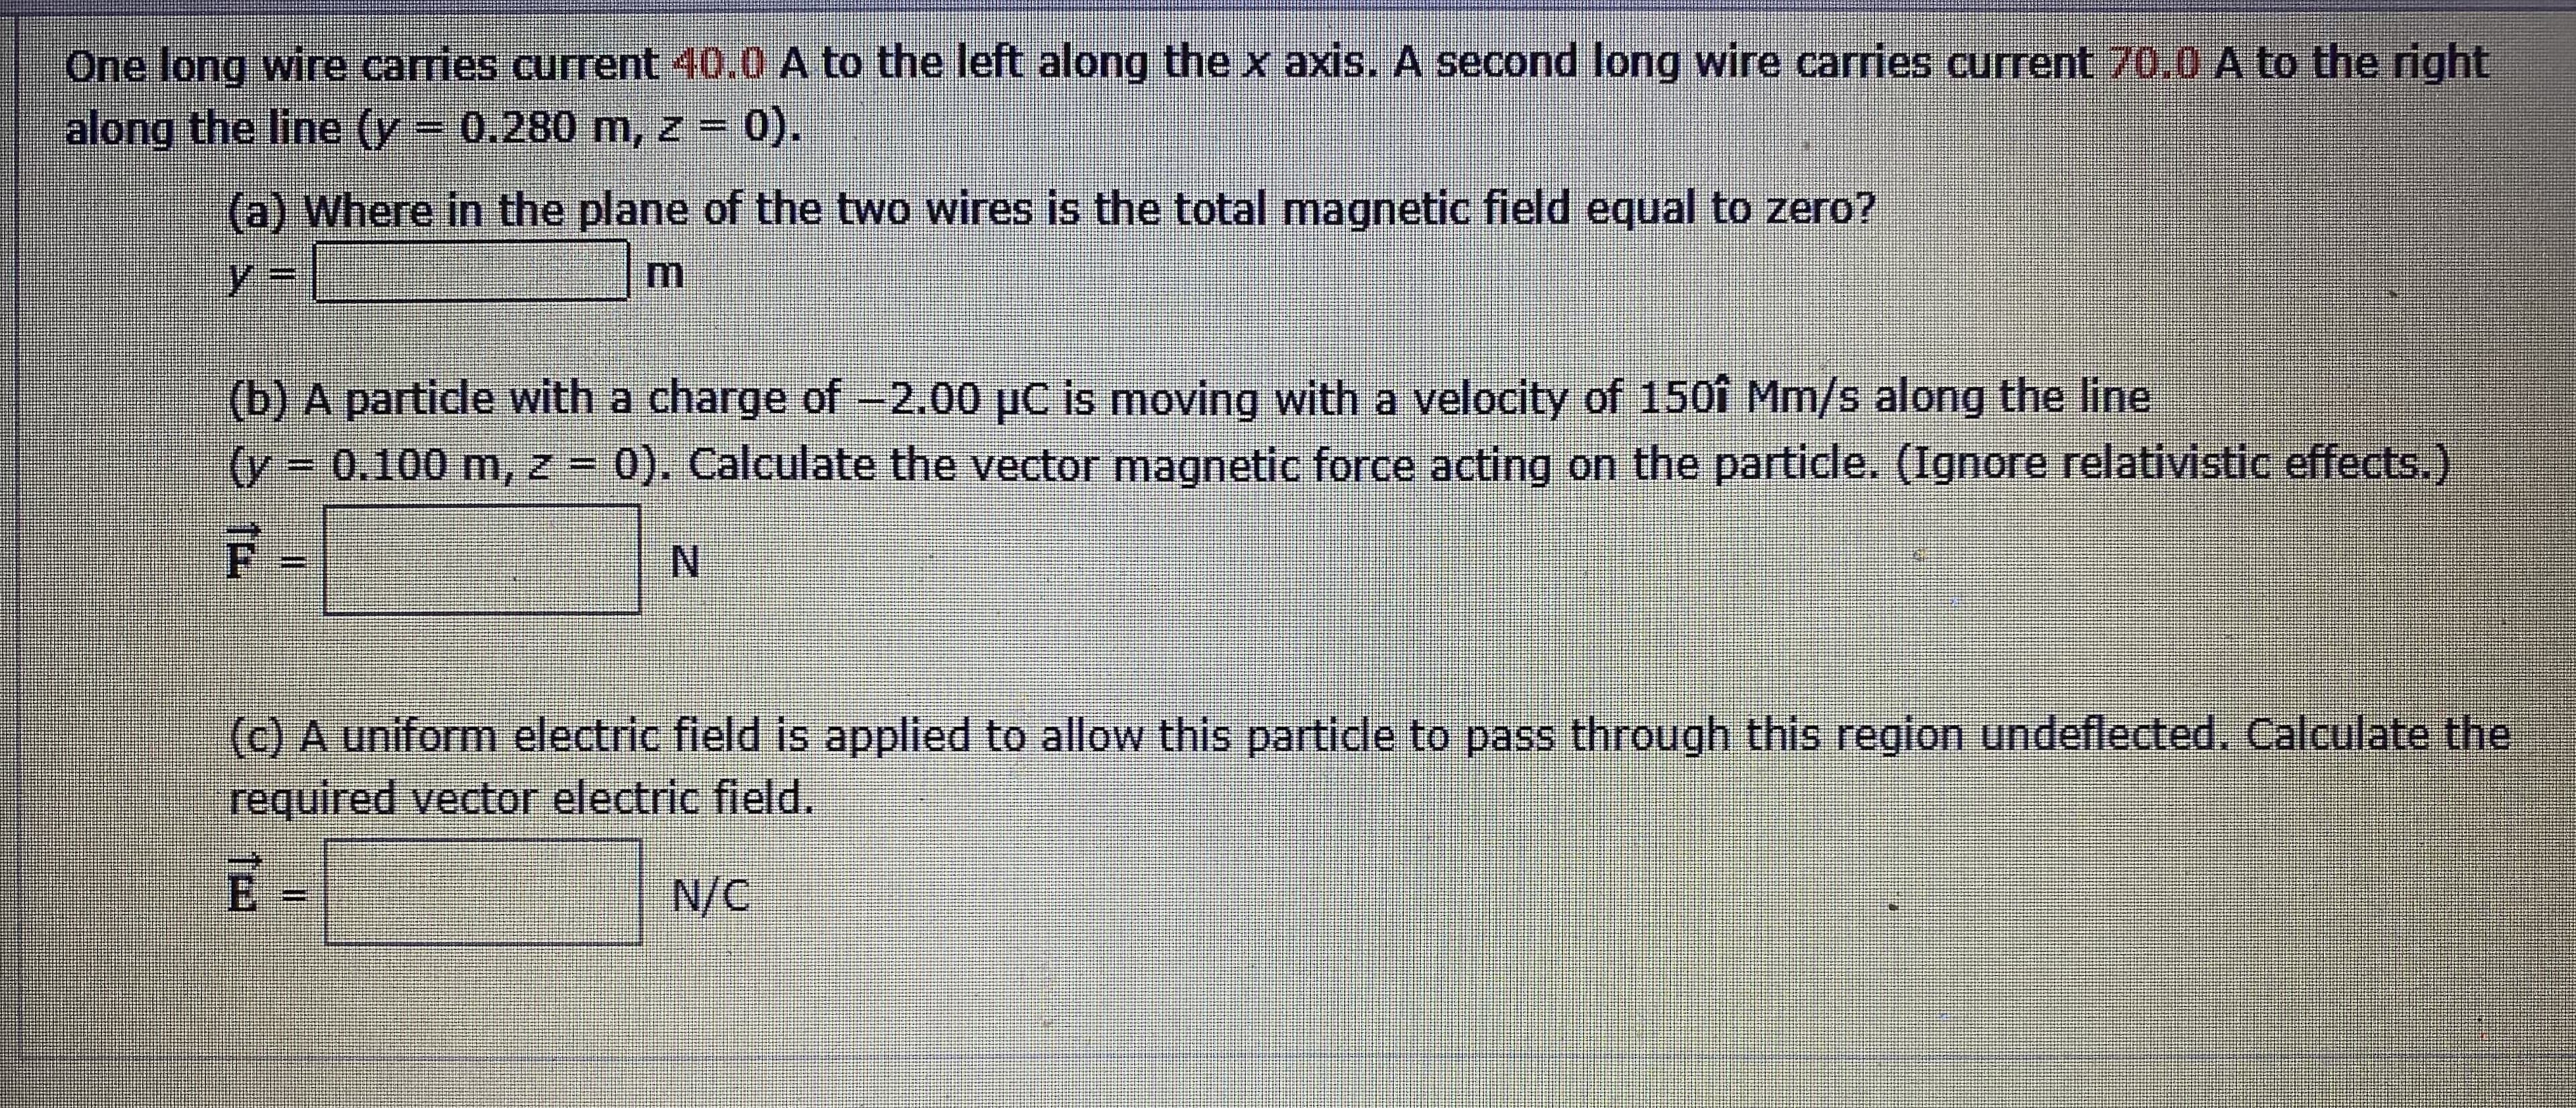 (c) A uniform electric field is applied to allow this particle to pass through this region undeflected. Calculate the
required vector electric field.
